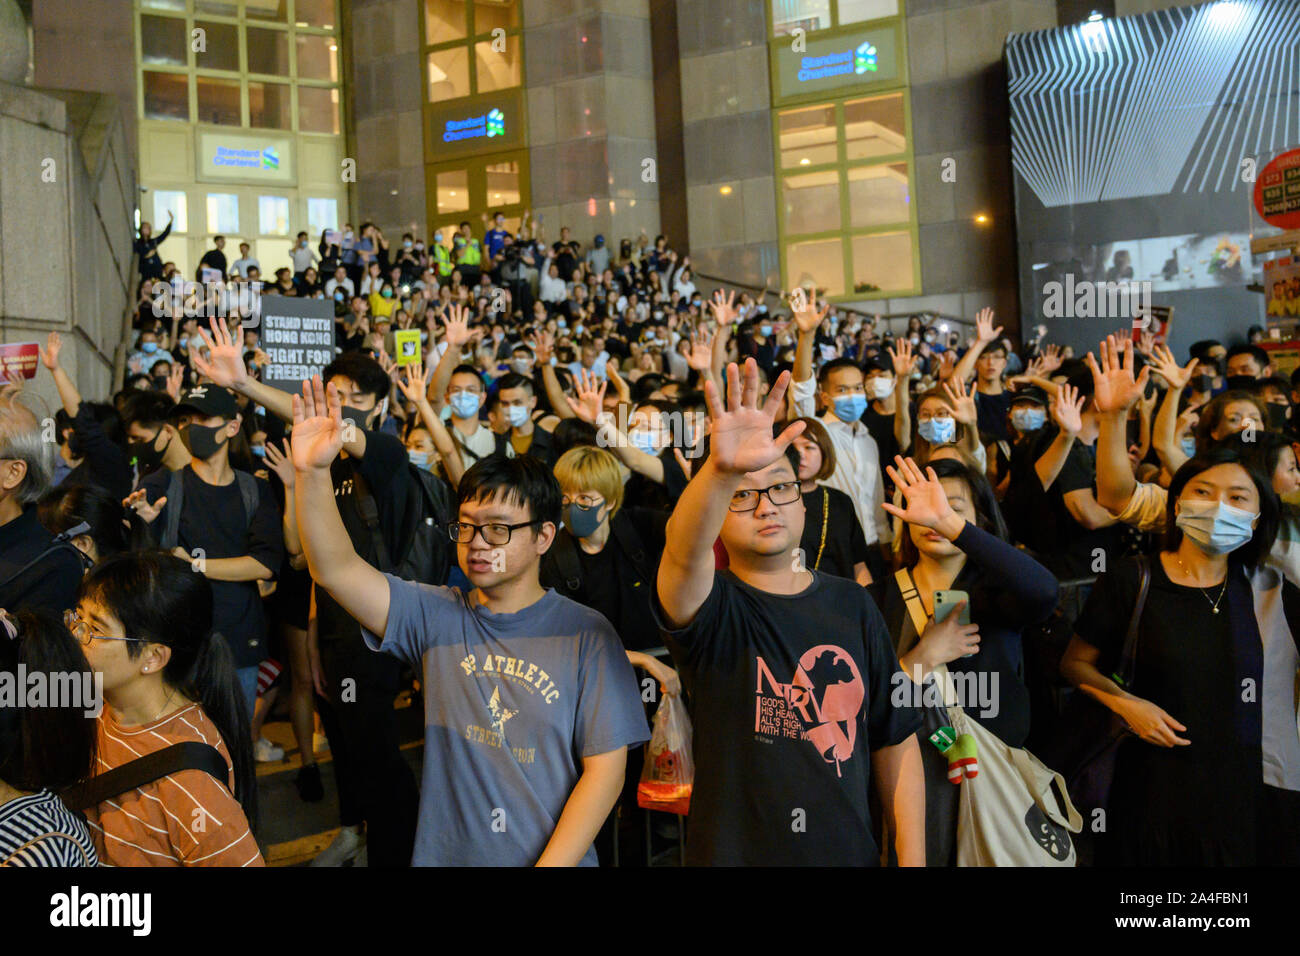 Central Hong Kong. October 14, 2019. Over 100,000 of protesters gathered in Chater Garden and spilled over into the Central Business district of Hong Kong for a peaceful demonstration. The gathering called on the United States to pass the Hong Kong Human rights and Democracy Act 2019. This act would sanction officials who undermined people's rights in the Hong Kong SAR. Stock Photo